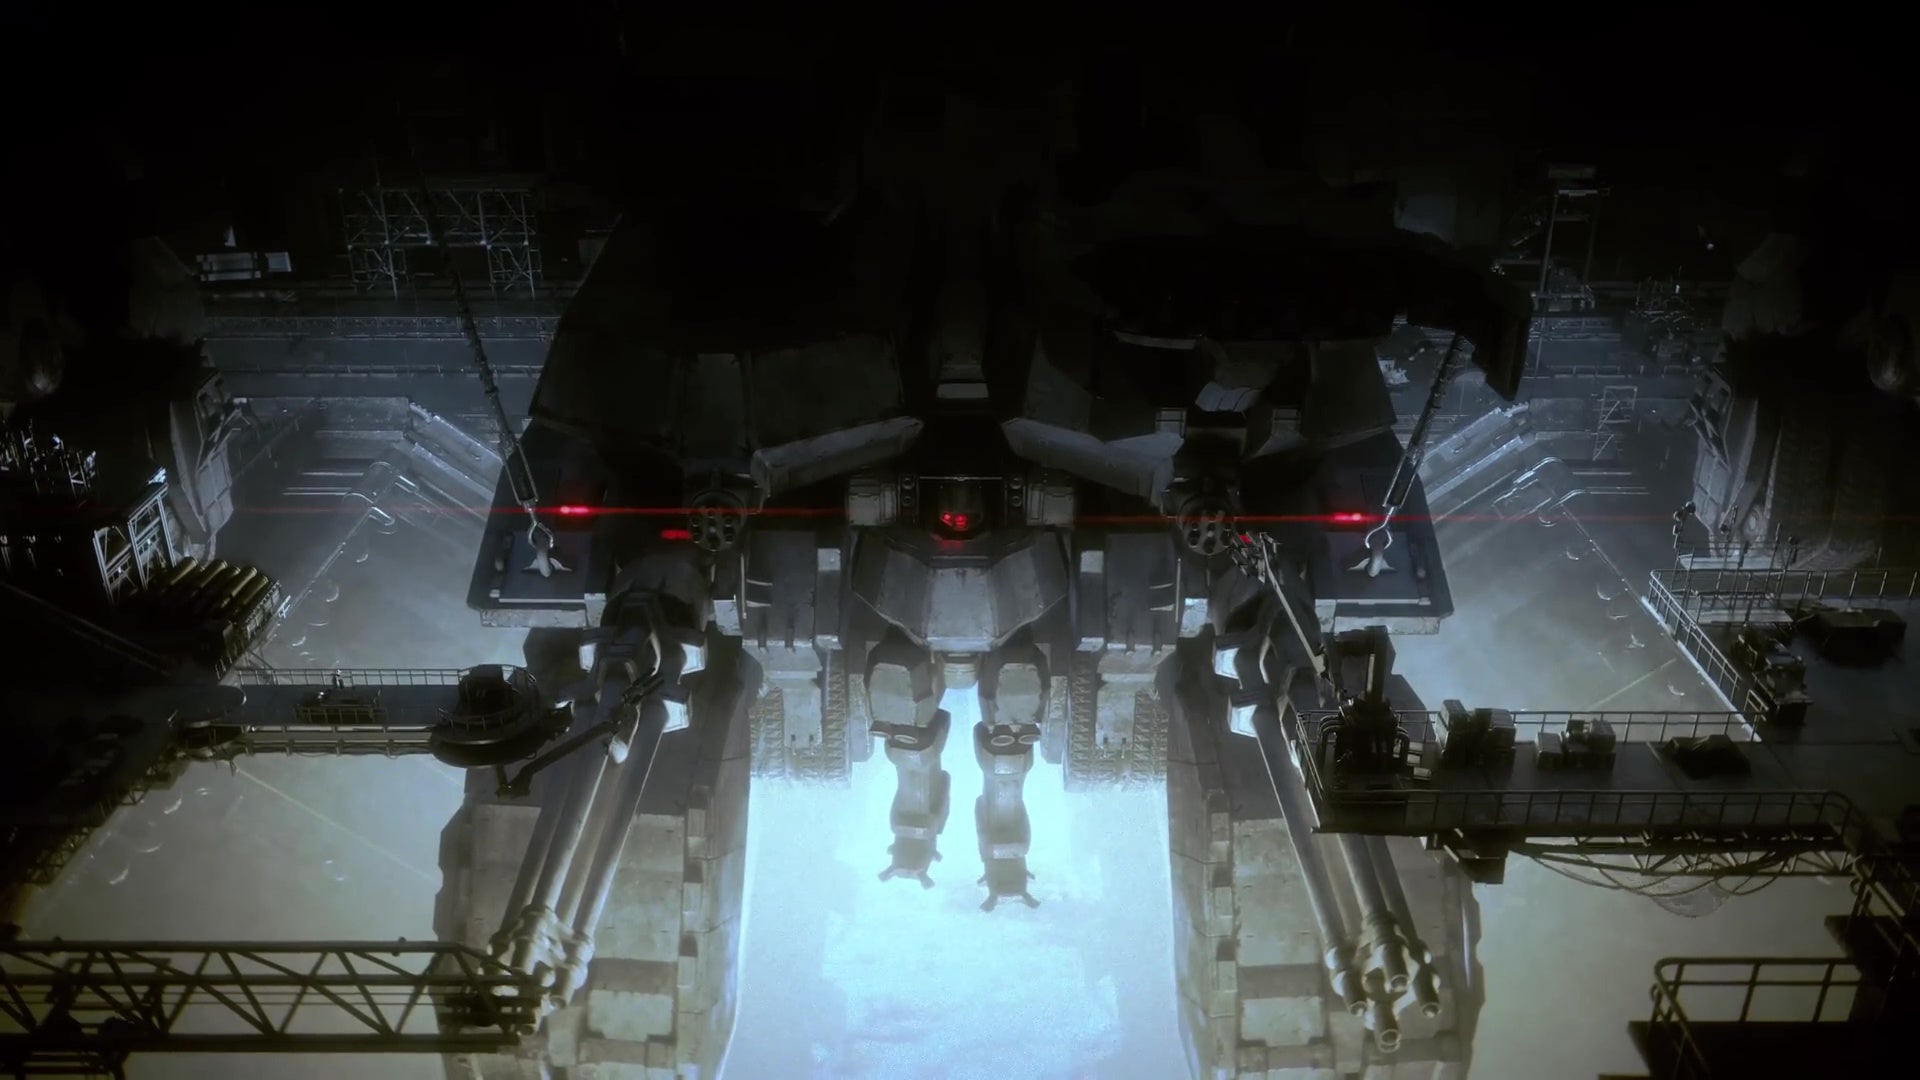 A mech is lowered into a light-filled opening in the Armored Core VI reveal trailer.